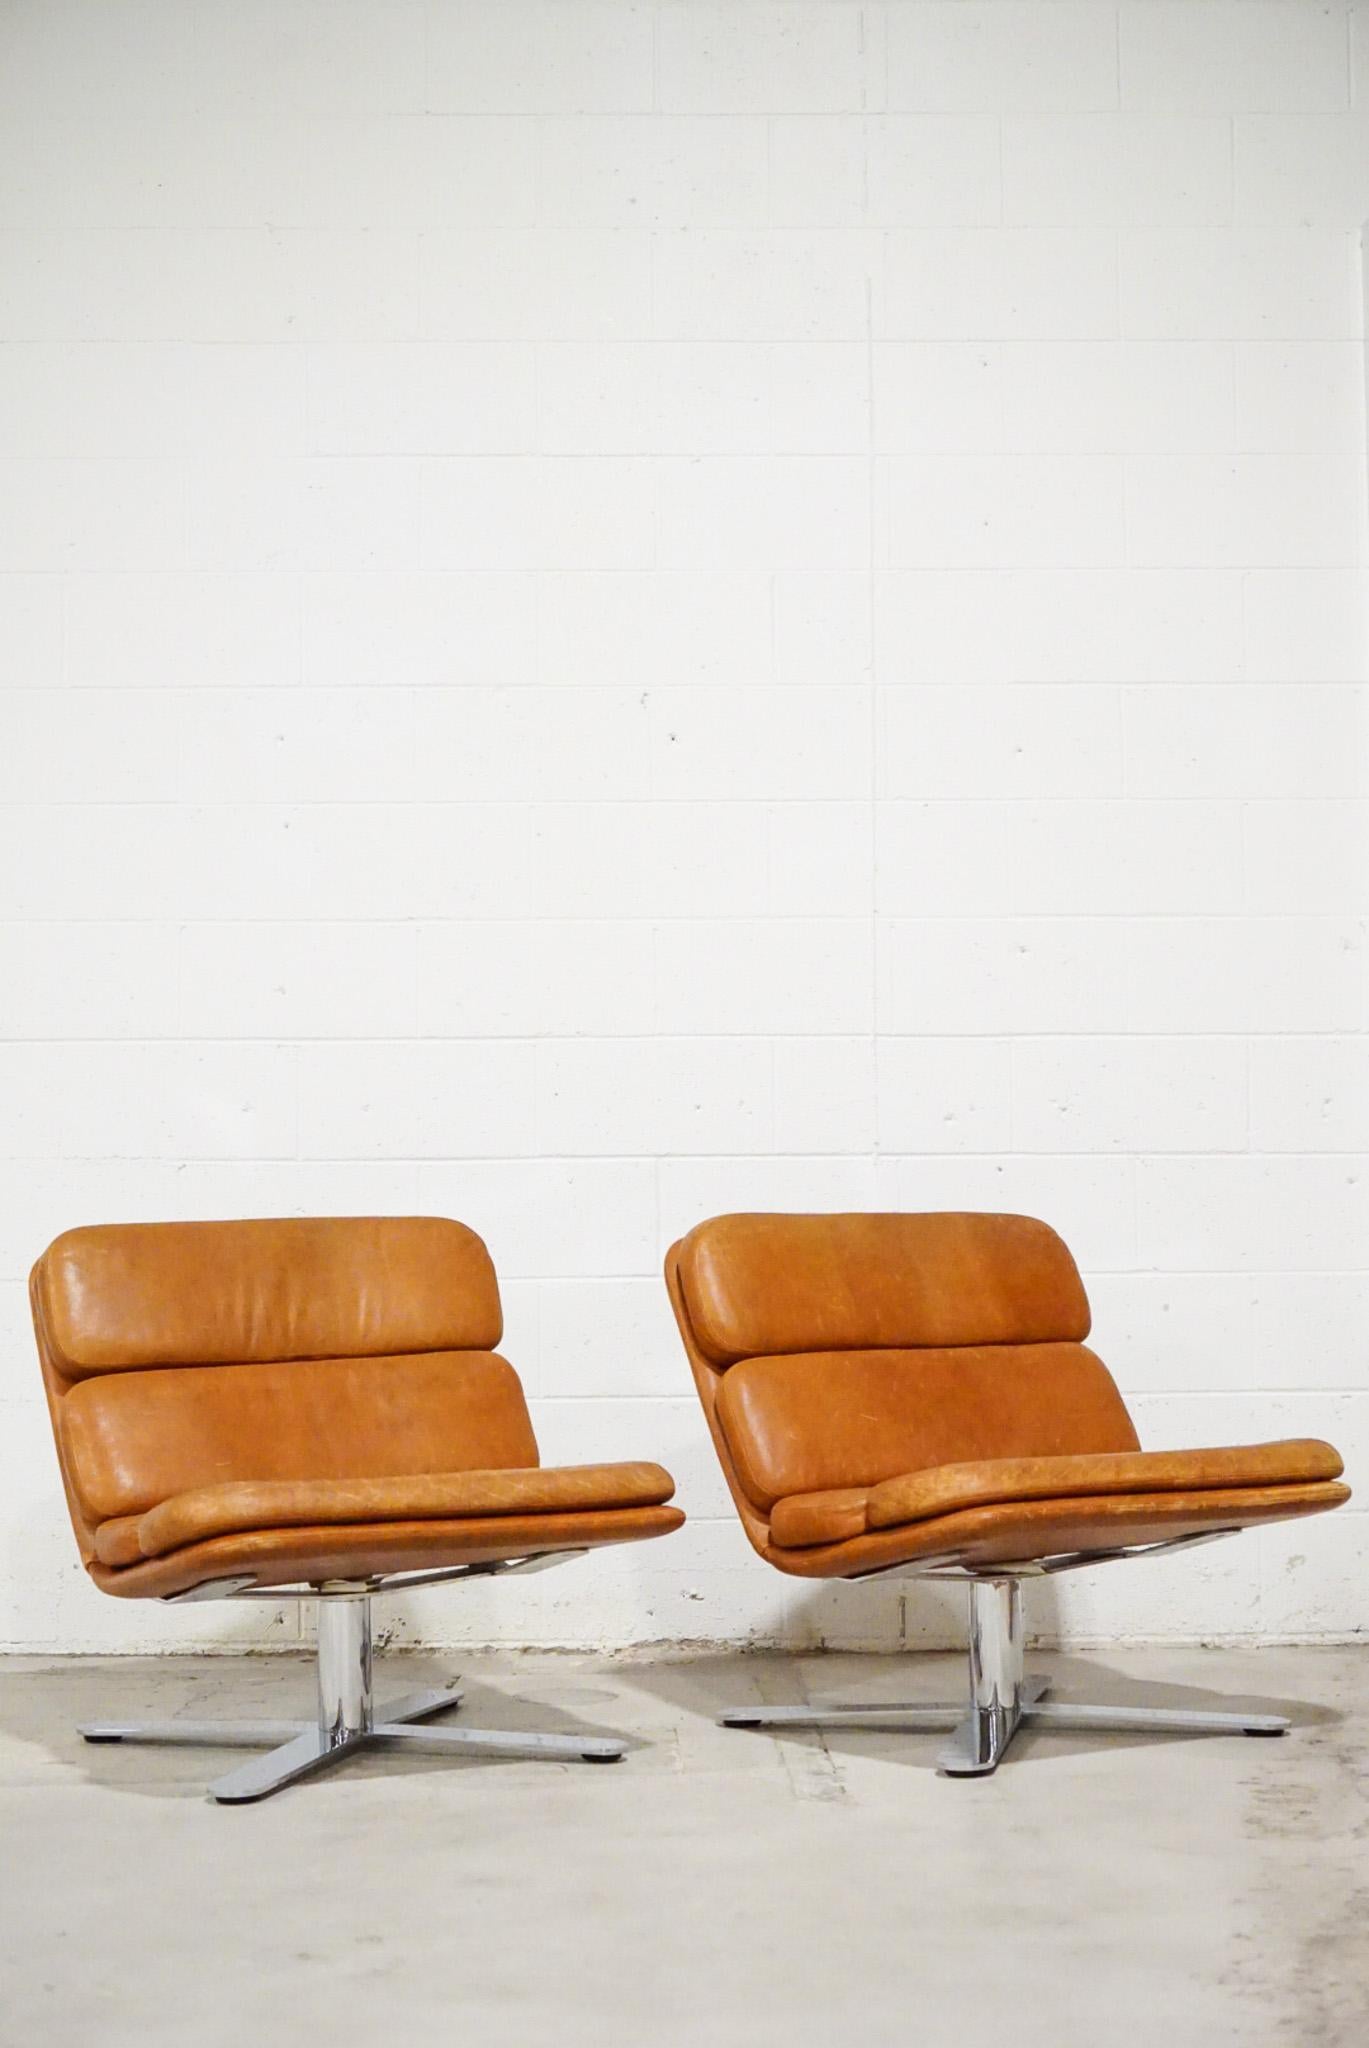 20th Century John Follis Pair of Patinated Leather Lounge Chairs, 1970s California